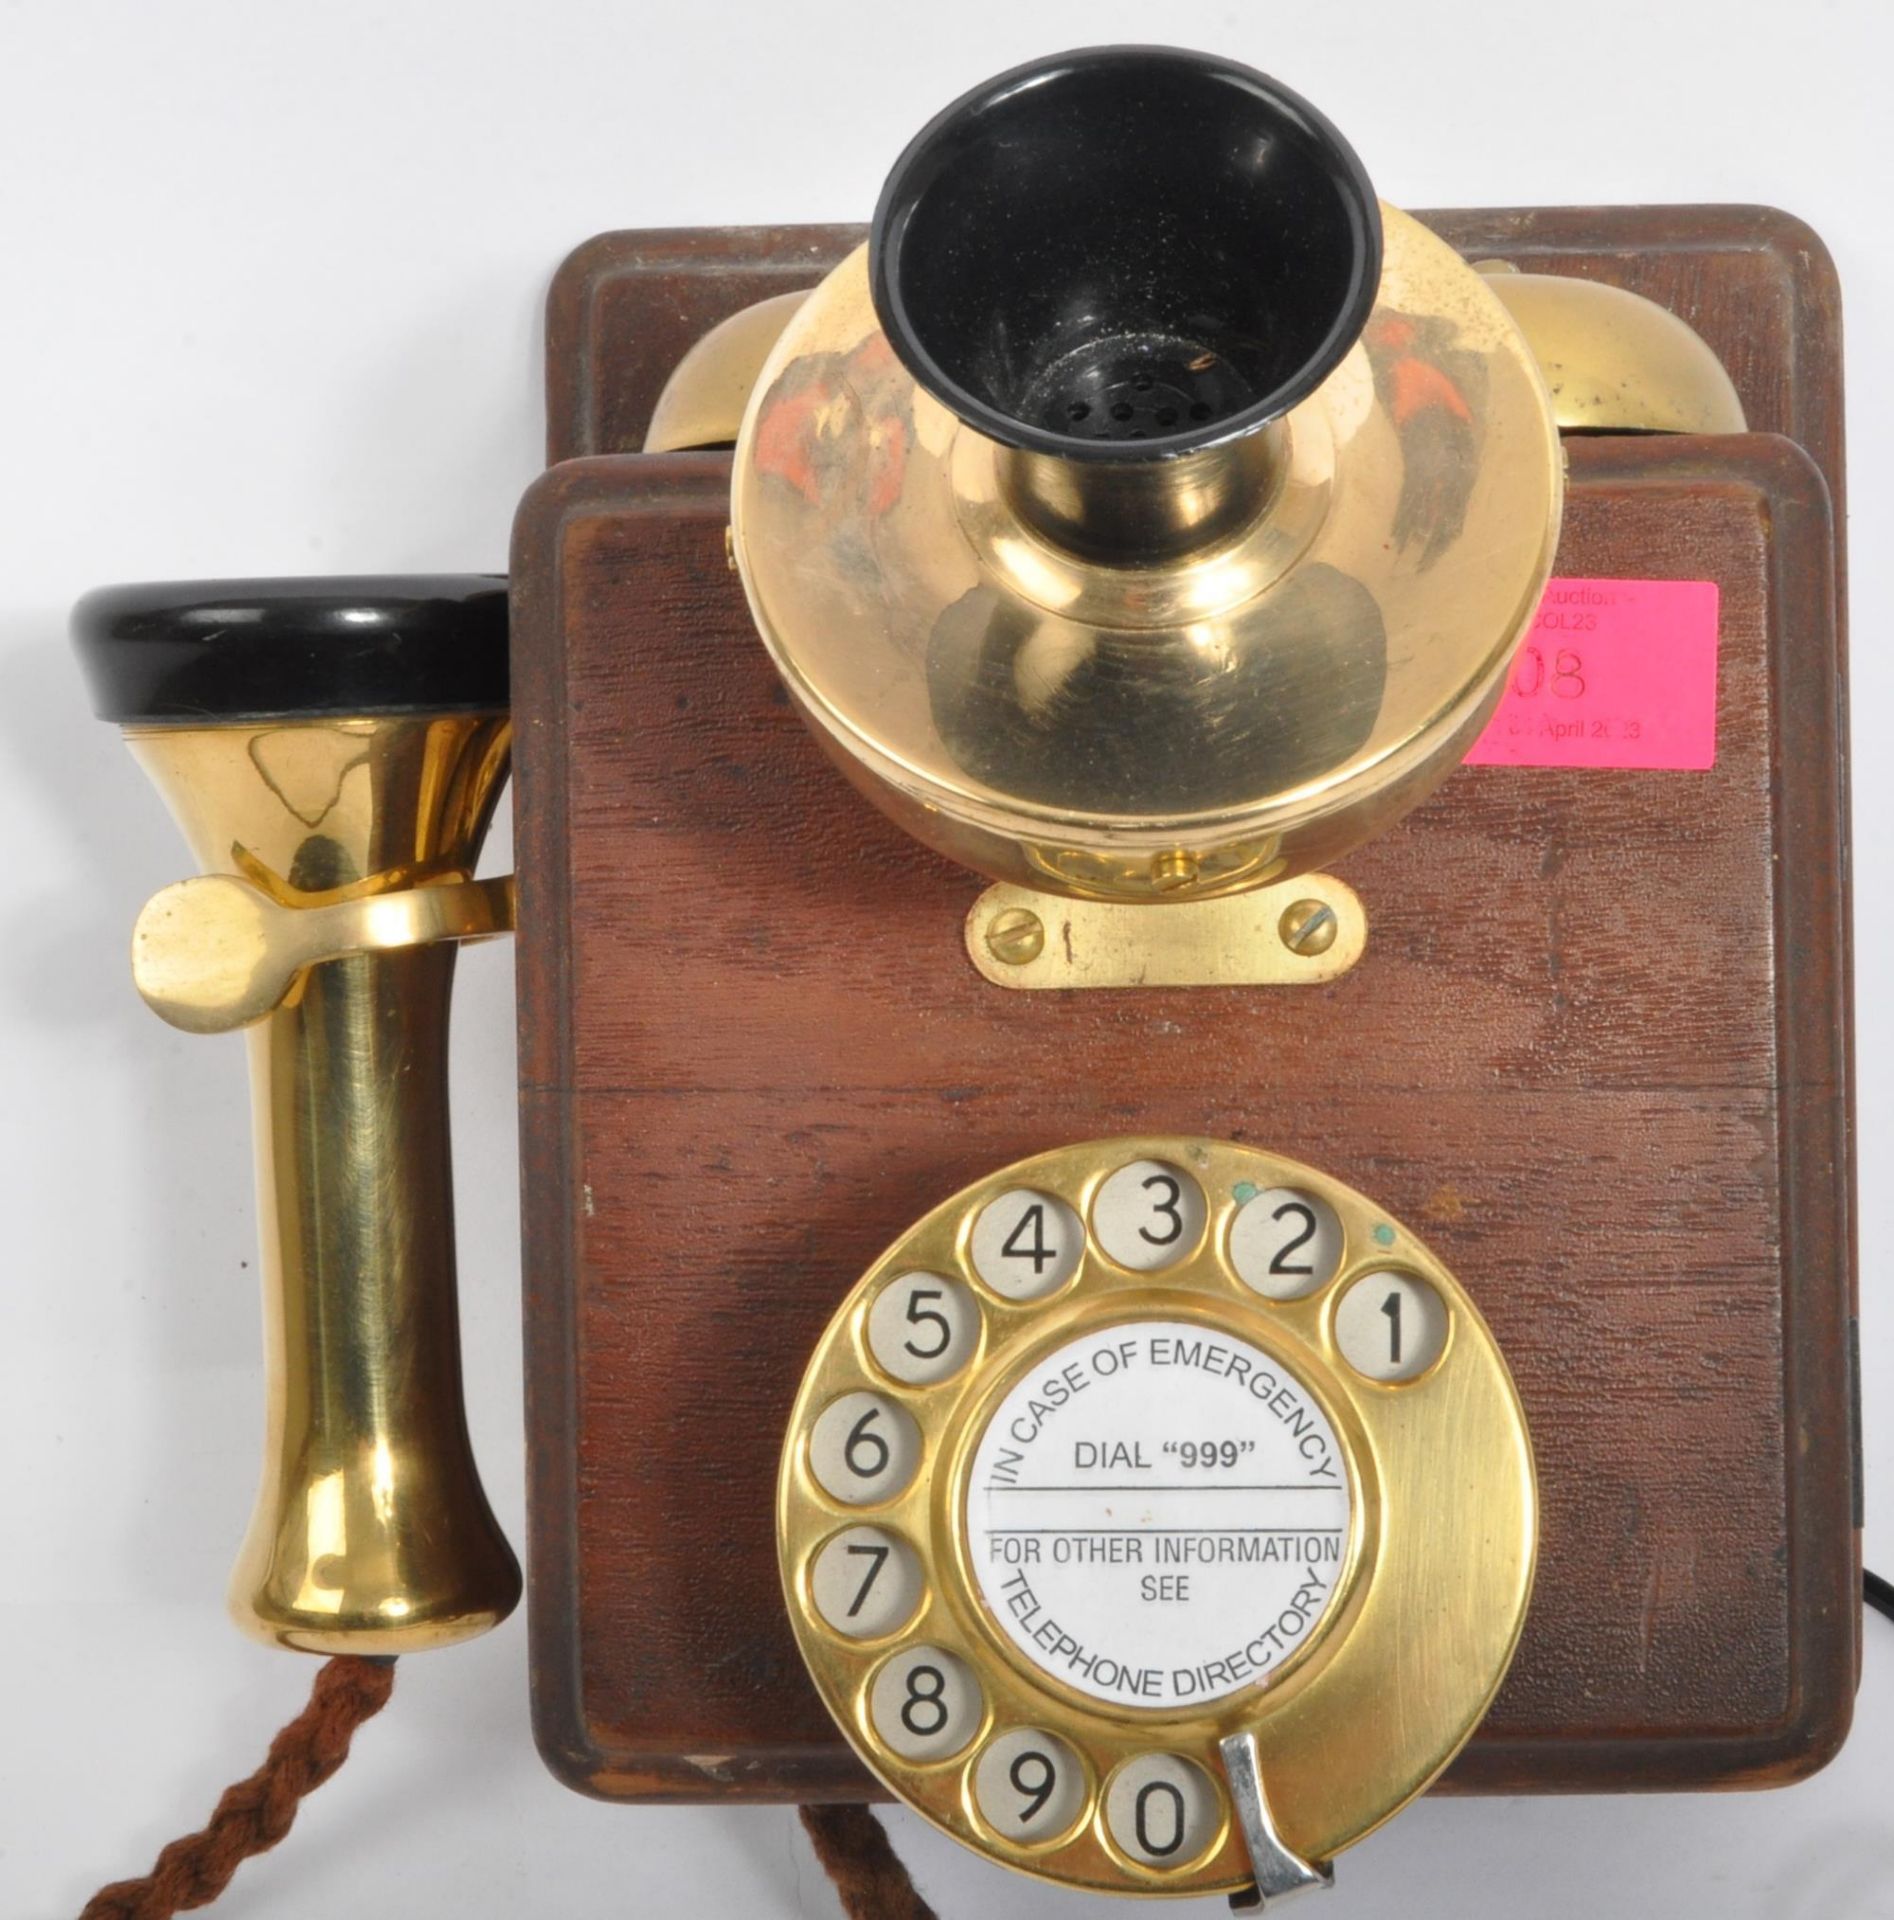 20TH CENTURY GPO 121 MODEL STYLE WOODEN WALL TELEPHONE